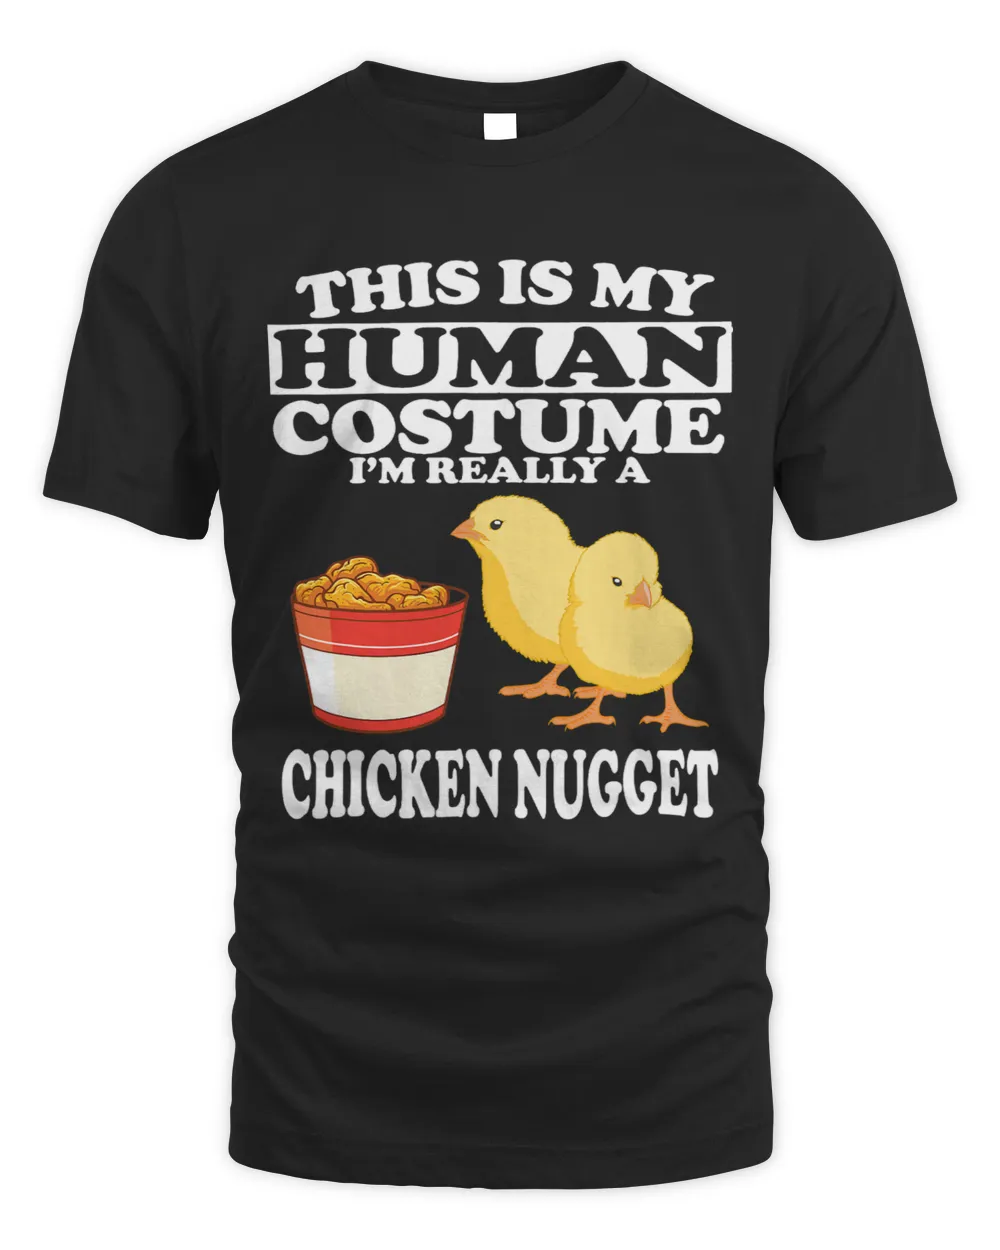 This Is My Human Costume Im Really a Chicken Nugget